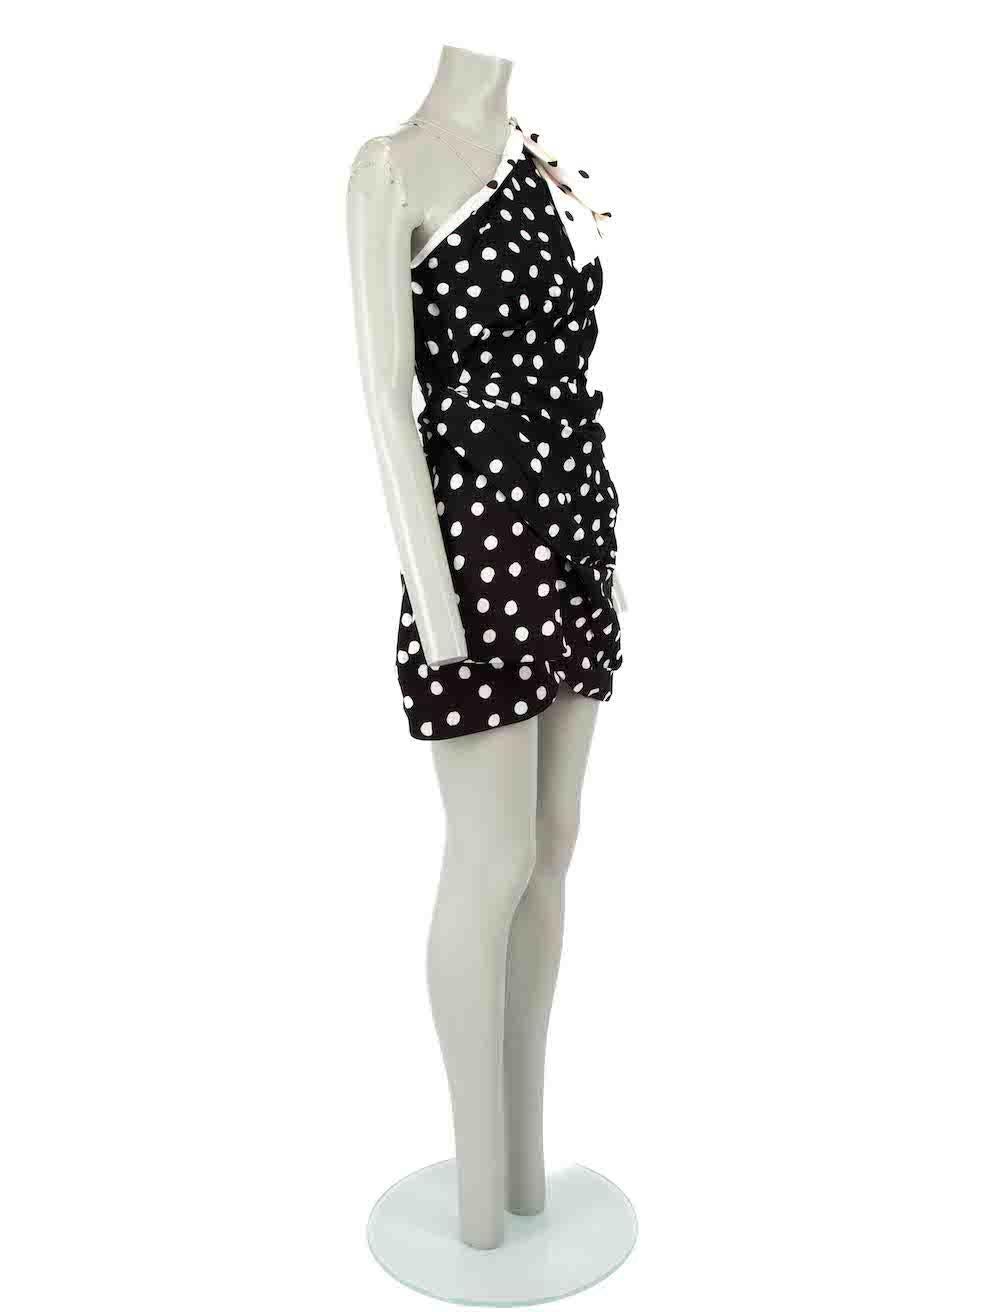 CONDITION is Never worn, with tags. No visible wear to dress is evident on this new Saint Laurent designer resale item, however there is a mark to the shoulder bow detail due to poor storage.
 
 Details
 Black
 Viscose
 Asymmetric dress
 Polkadot